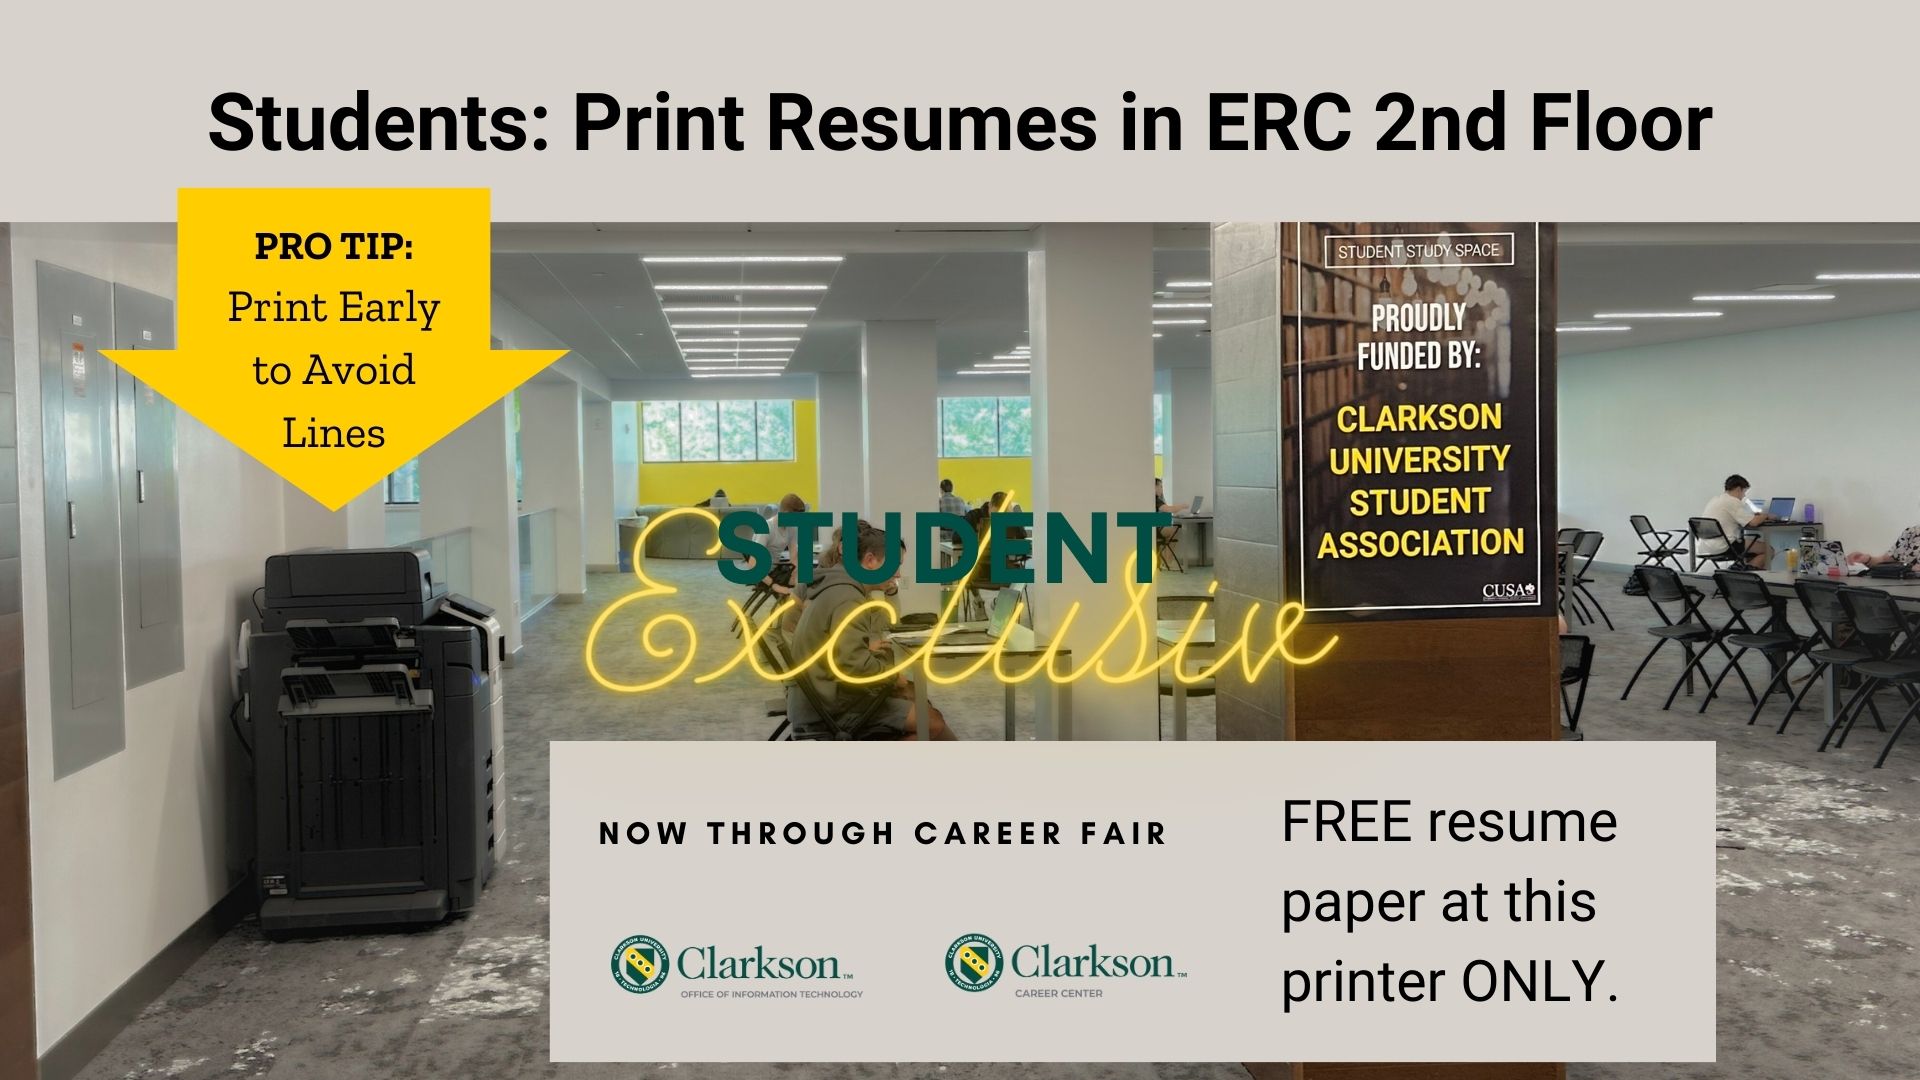 Students Welcome to Print Resumes in ERC